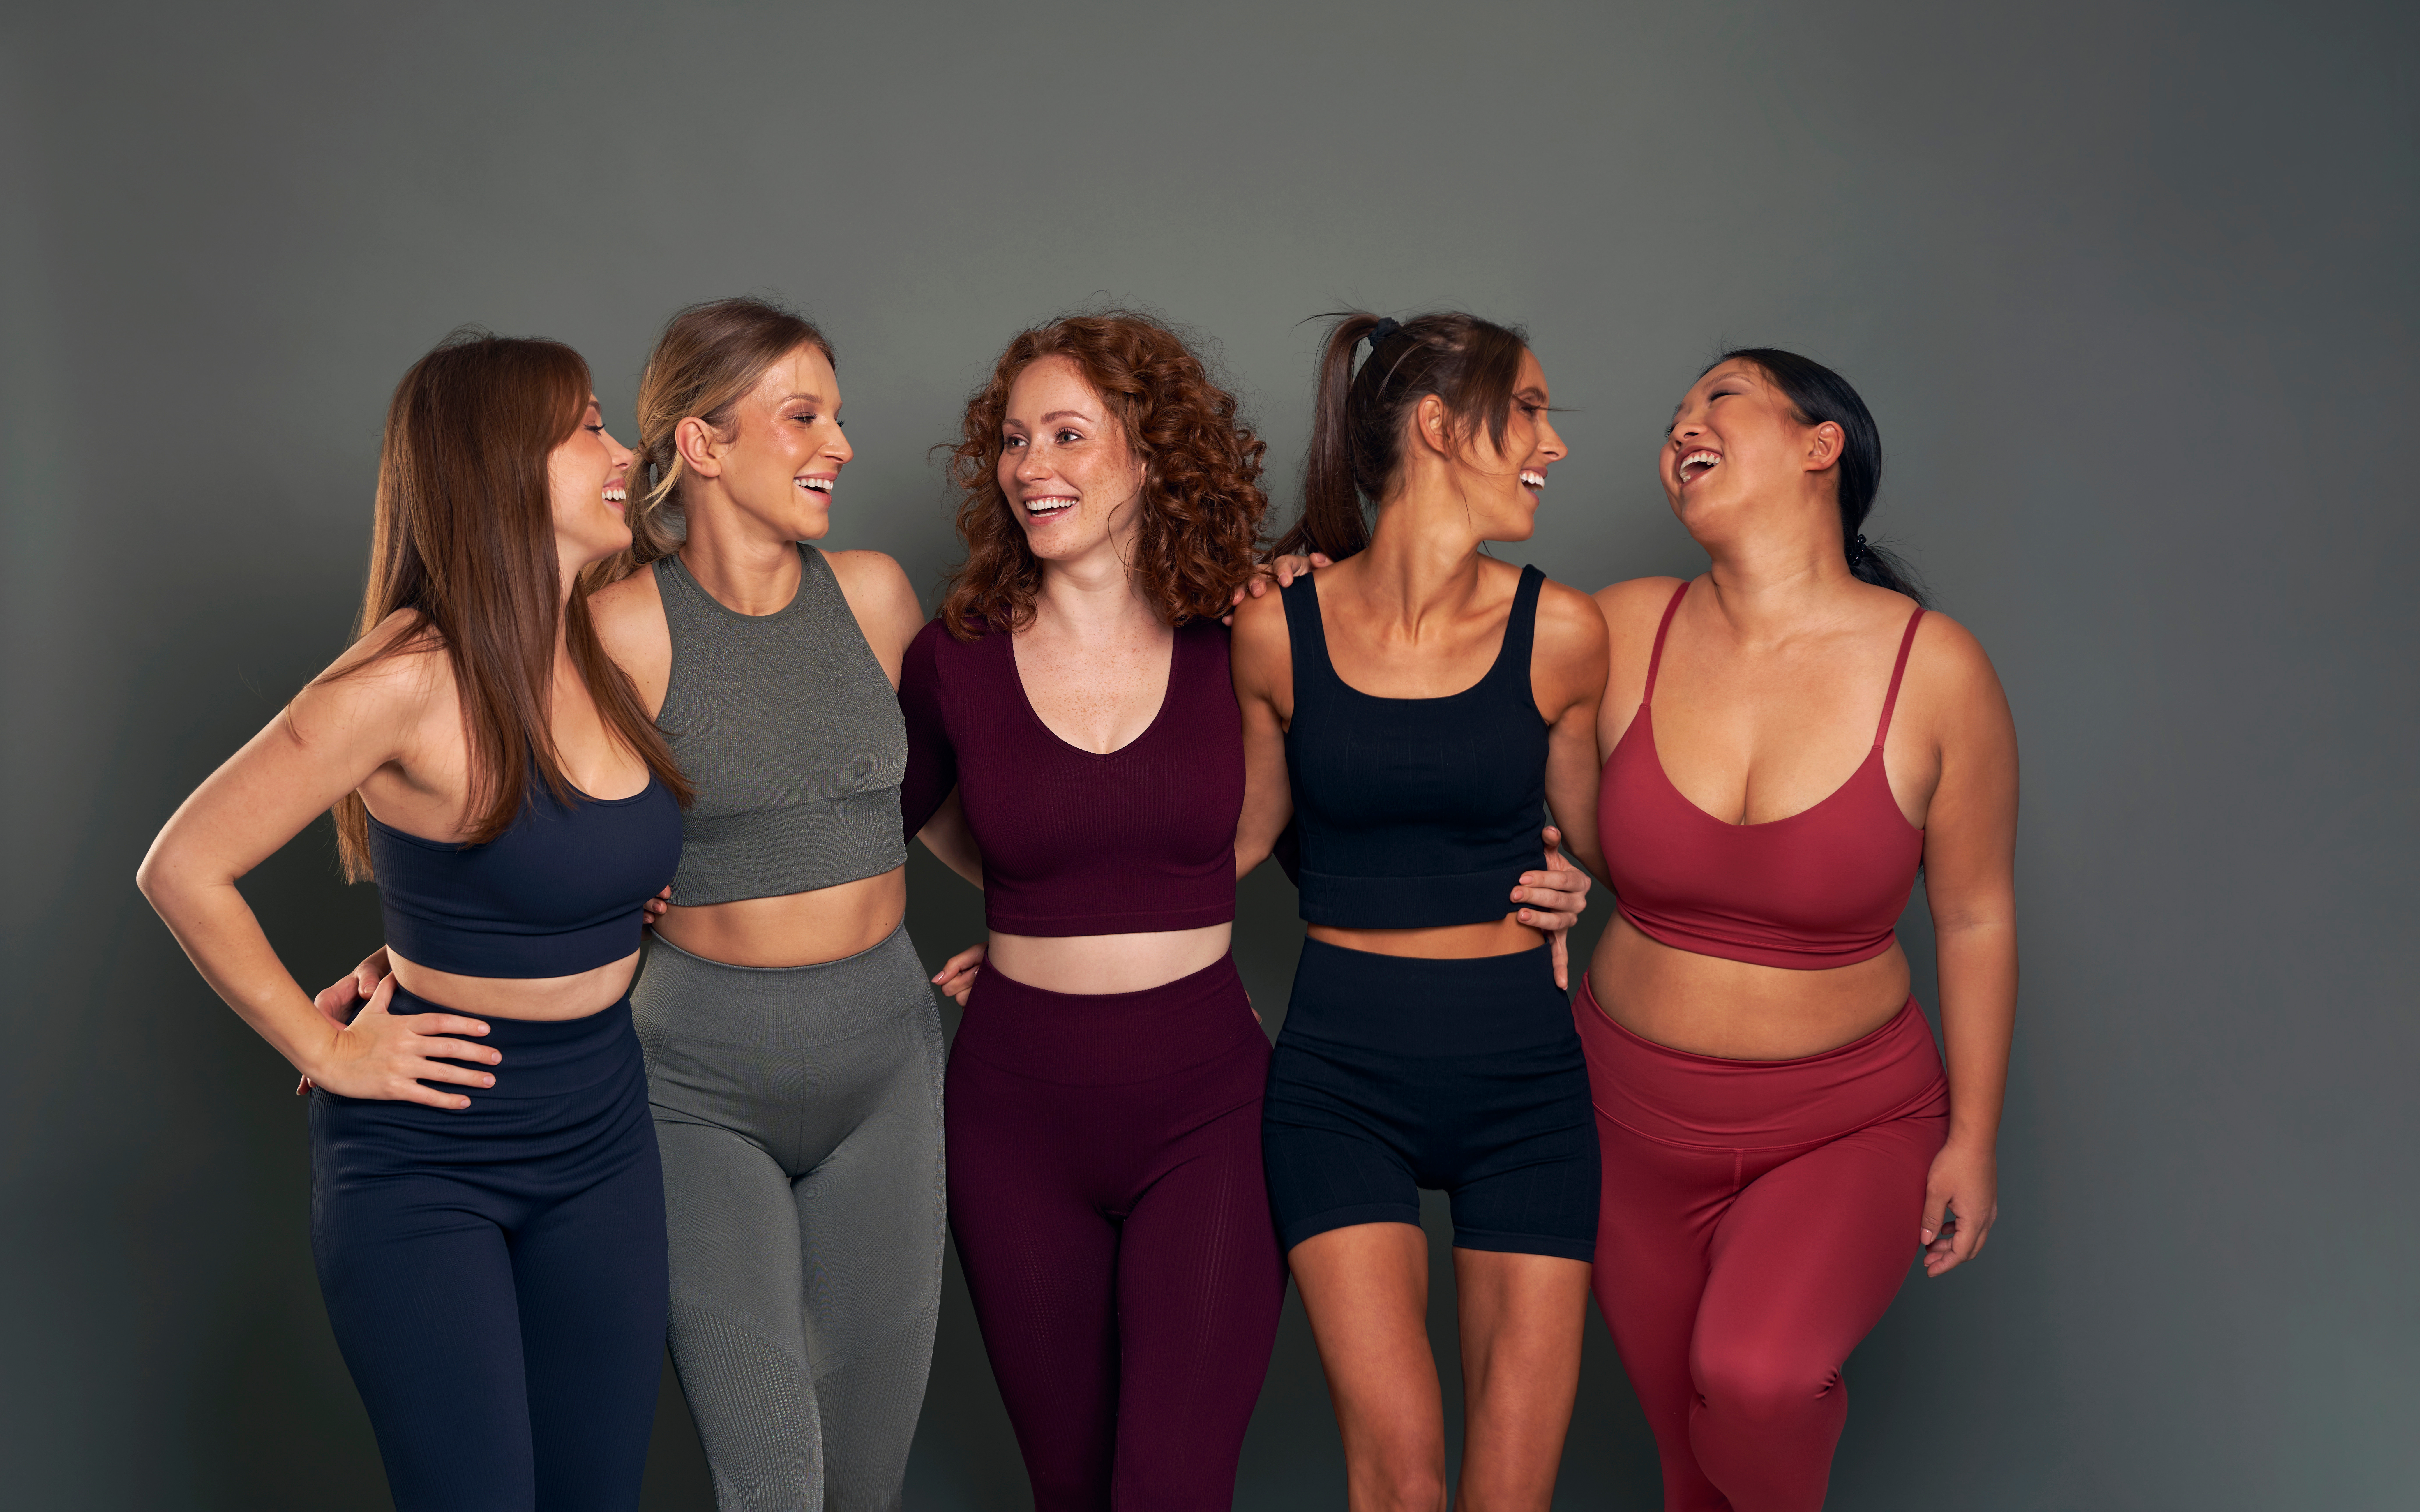 A group of woman of all shapes and sizes stand together smiling to model Semaglutide weight loss injections in McLean.